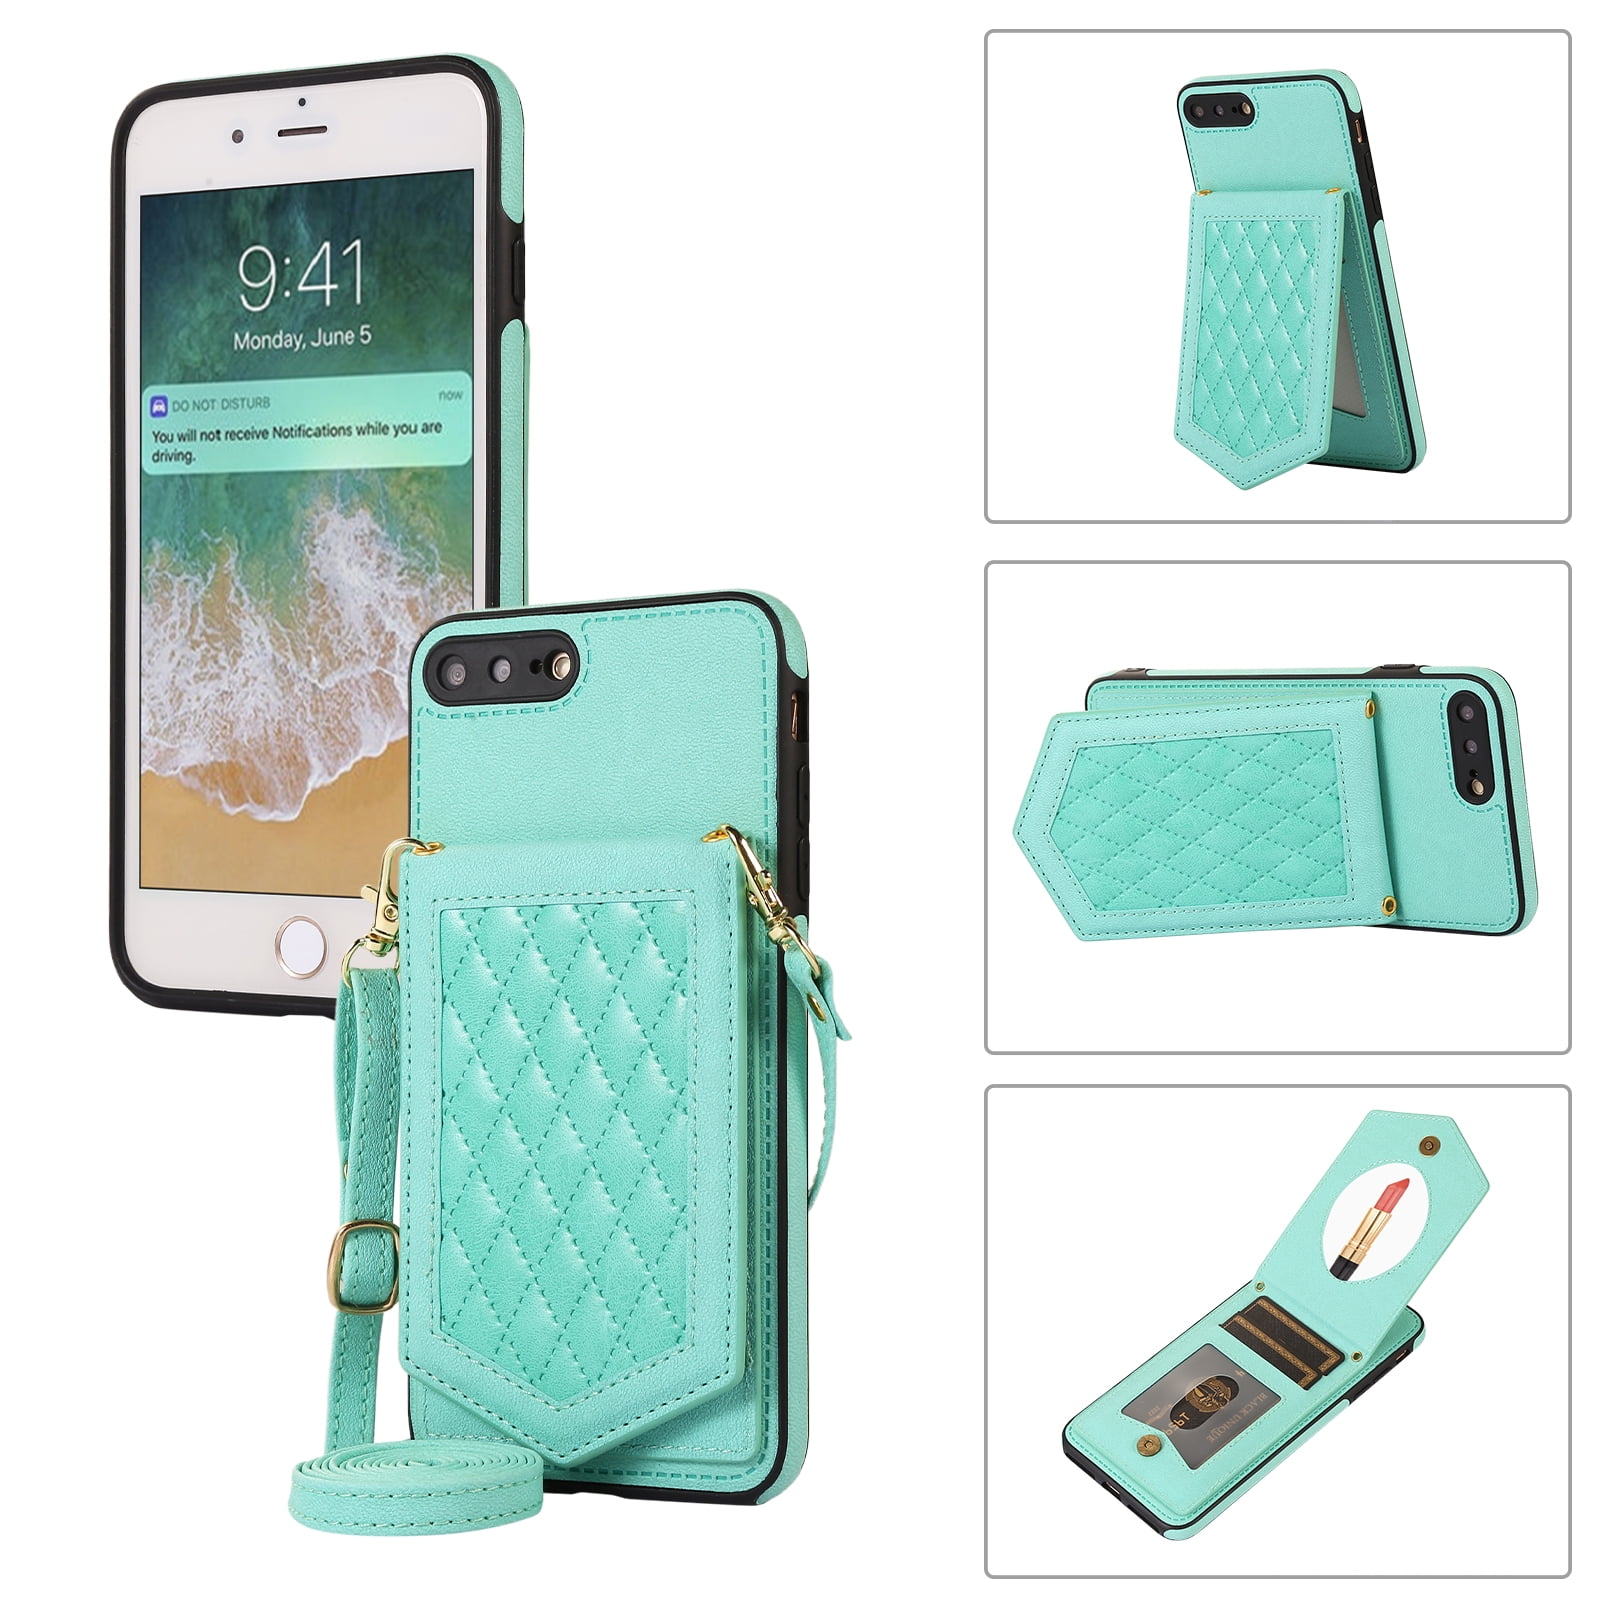 Plus/7 Lanyard PU Case iPhone Women with Plus, Leather Strap For Mirror Case Back Handbag Card with Mantto 8 iPhone Kickstand Slot iPhone for for 8 Plus,Crossbody Flip Credit Neck 7 Plus,